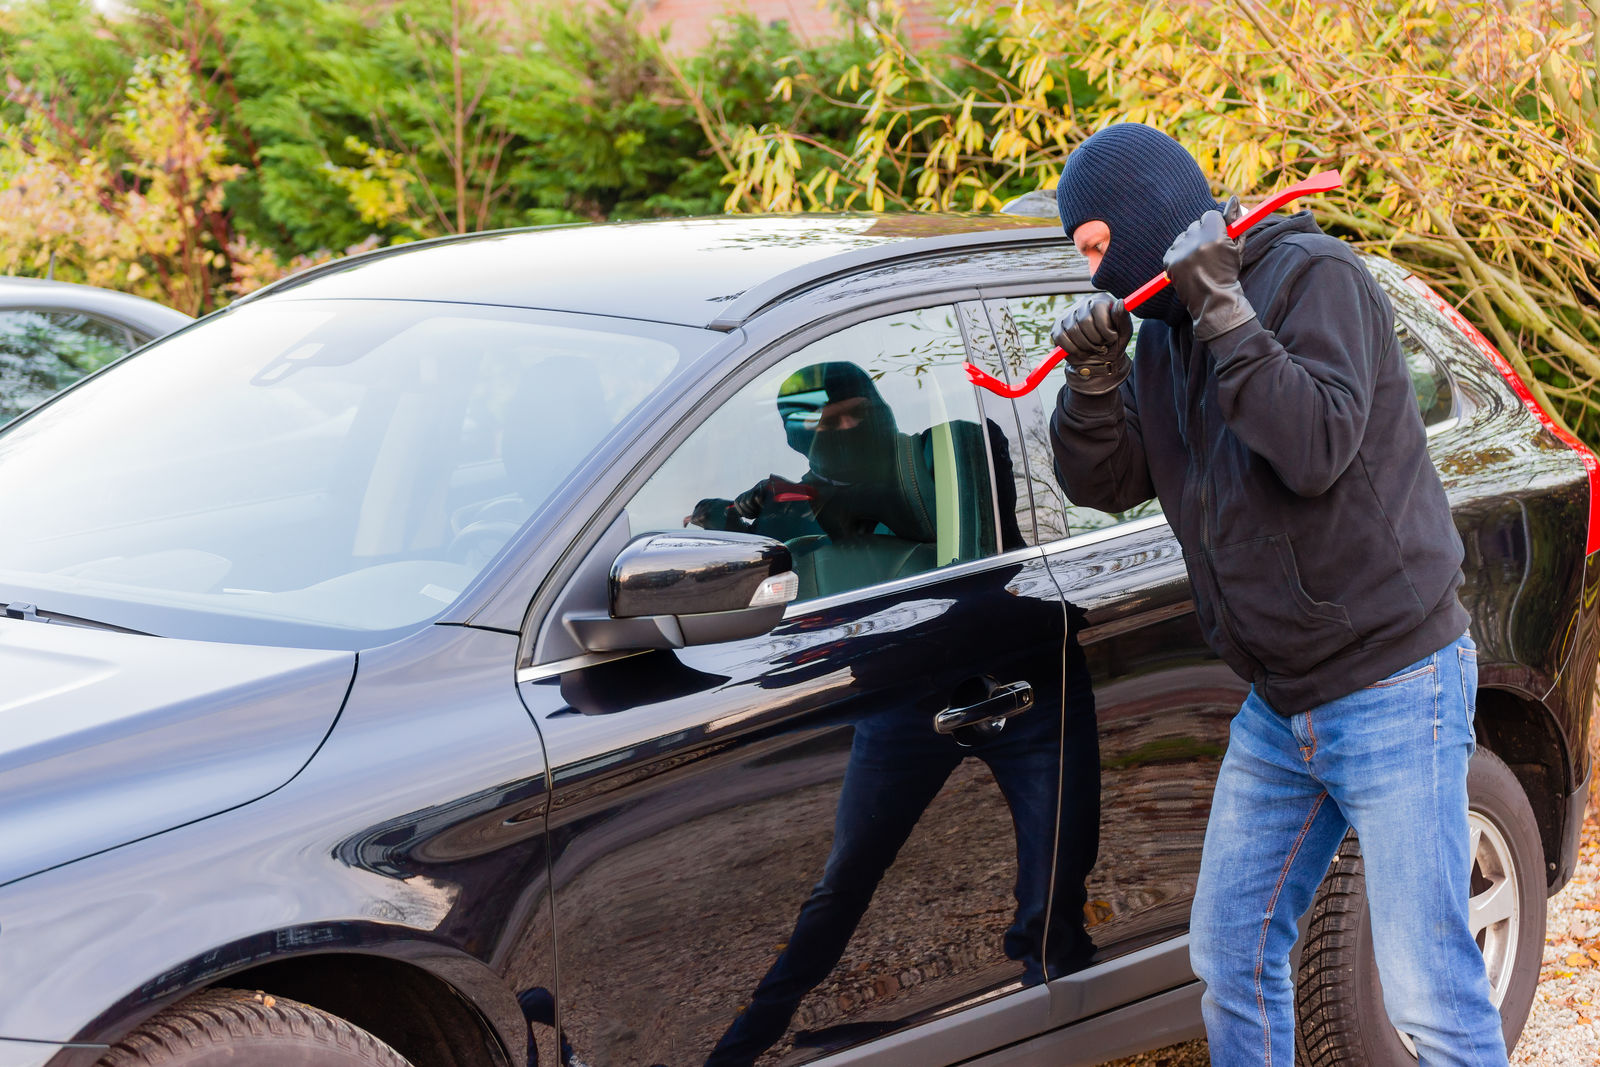 What does an insurance company do when your car is stolen?